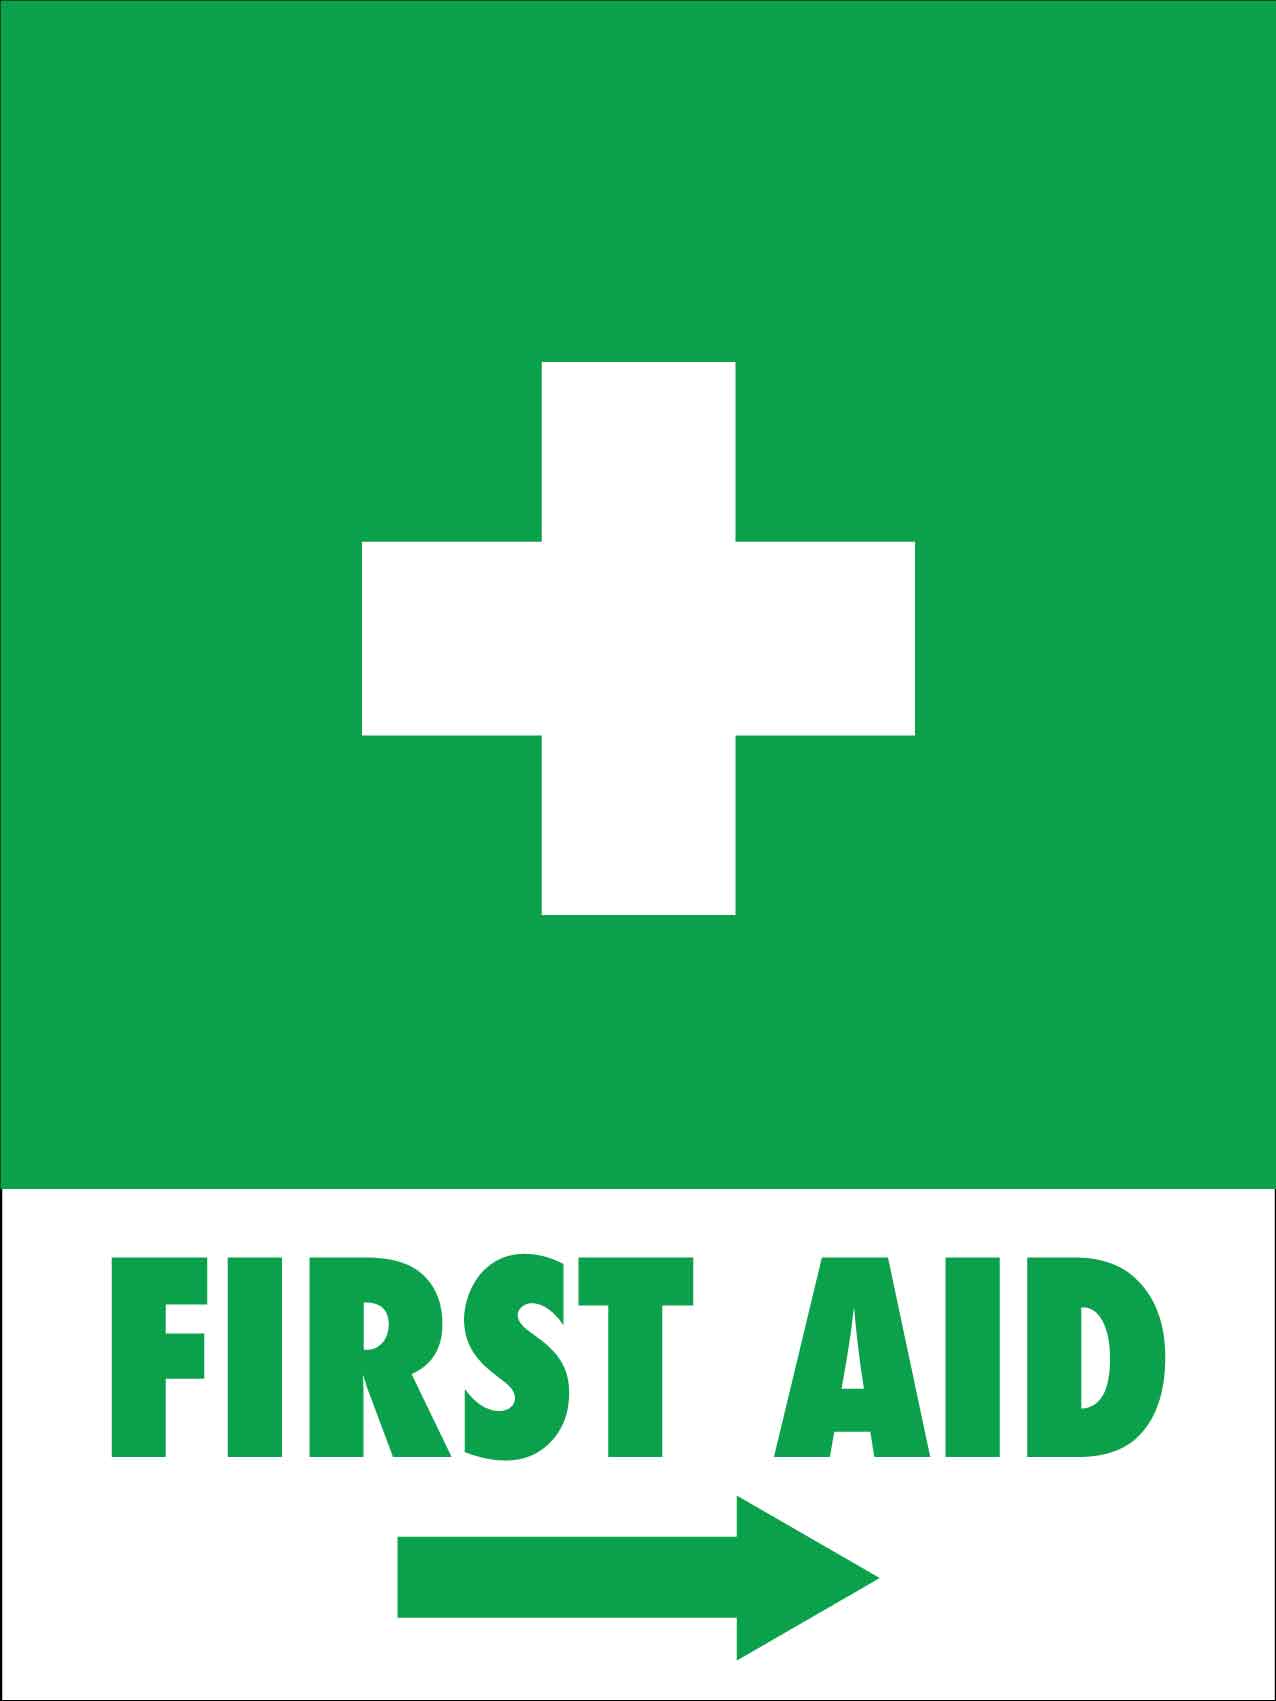 First Aid Green (Arrow Right) Sign